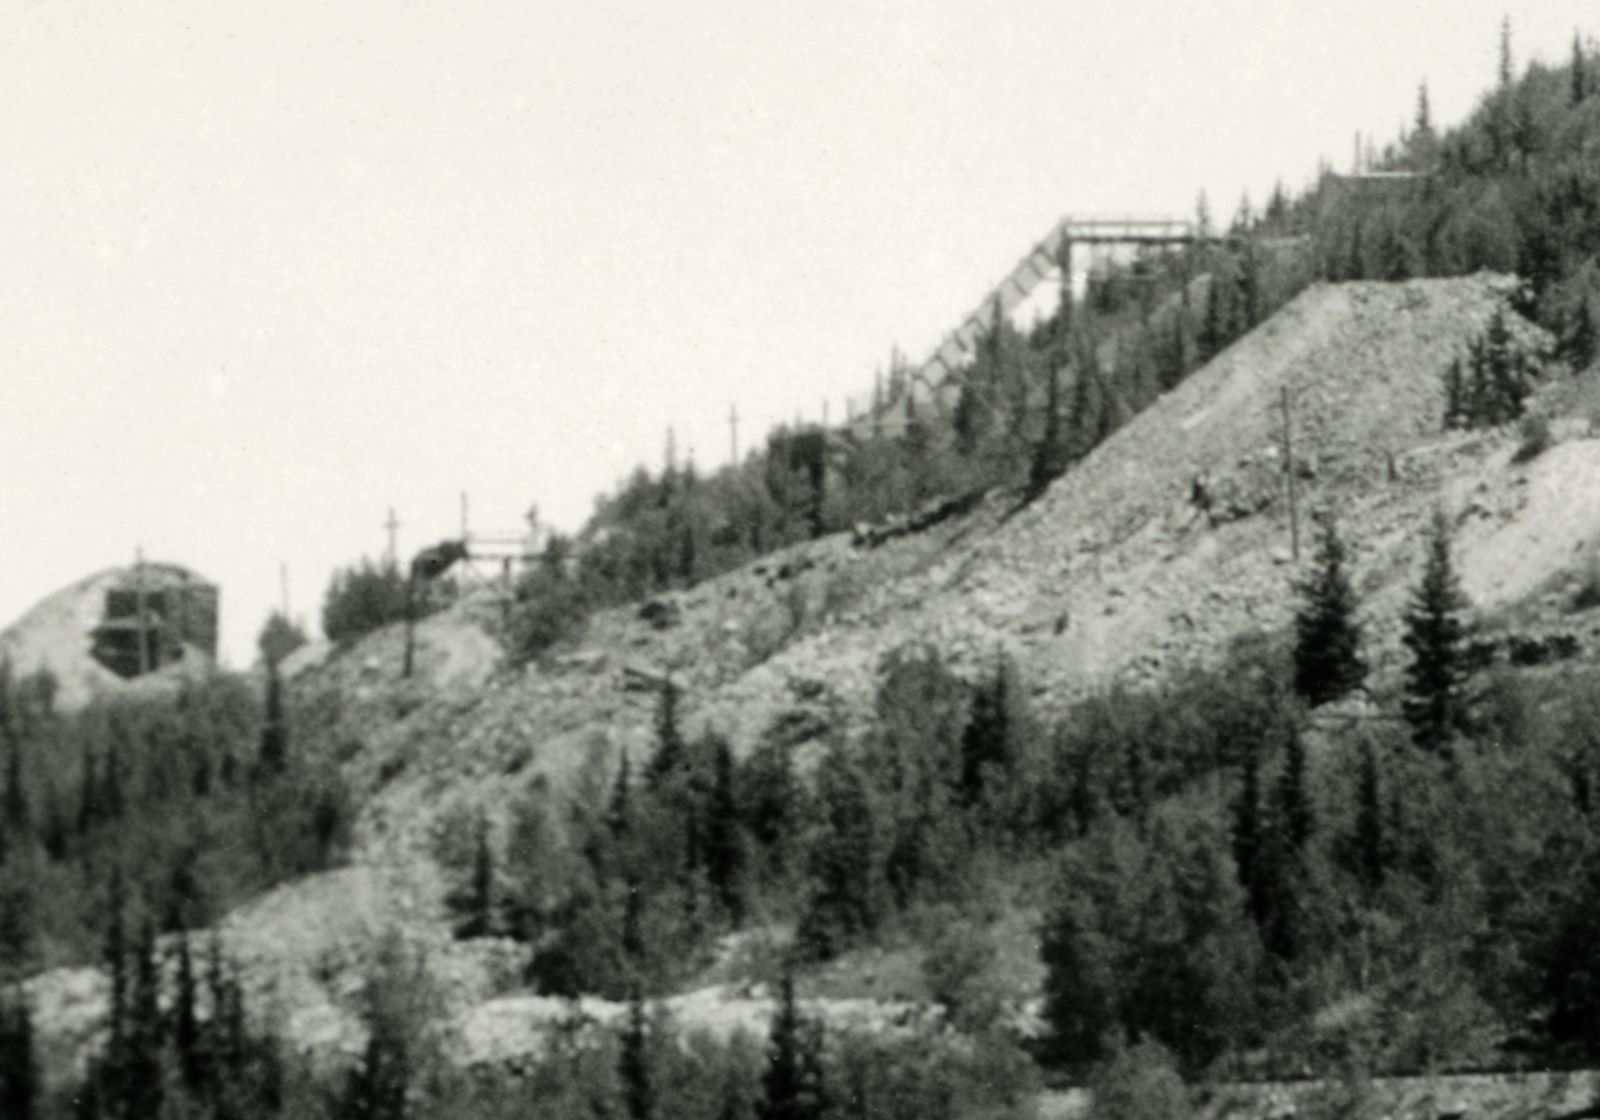 This long-range Close-up view of the Victor Mine operations, is sadly not a good view, but most views I have of operations at this mine is of this type, taken from far away. Taken from a 1200dpi scan of a 1934-ish Press Photo used in some unknown Newspaper, it shows lot of tree growth hiding away the dumps and what is left of structures at this mine.
   There appears to be some sort of work going on at higher grounds, seeing that trestle work and the chute on the right upper part of this view, dropping down to more familiar height of the old Victor mine structure, as that was, based on old images, more in same height as the top of the crib-wall seen near middle top/down and left-hand edge of this image. Seems to possible be an Ore-bin at the bottom of that wooden chute down from the platform on the right top side of this image. That Ore-bin is located about center of image.
   A little bit more then 1/3 up from bottom of image the mainline of the old Golden Circle, now Midland Terminal standard gauge, can be seen, and in foreground right lower corner the switchback side-spur down to the Isabella Mine ore-bins can be seen partly before trees cover it all.